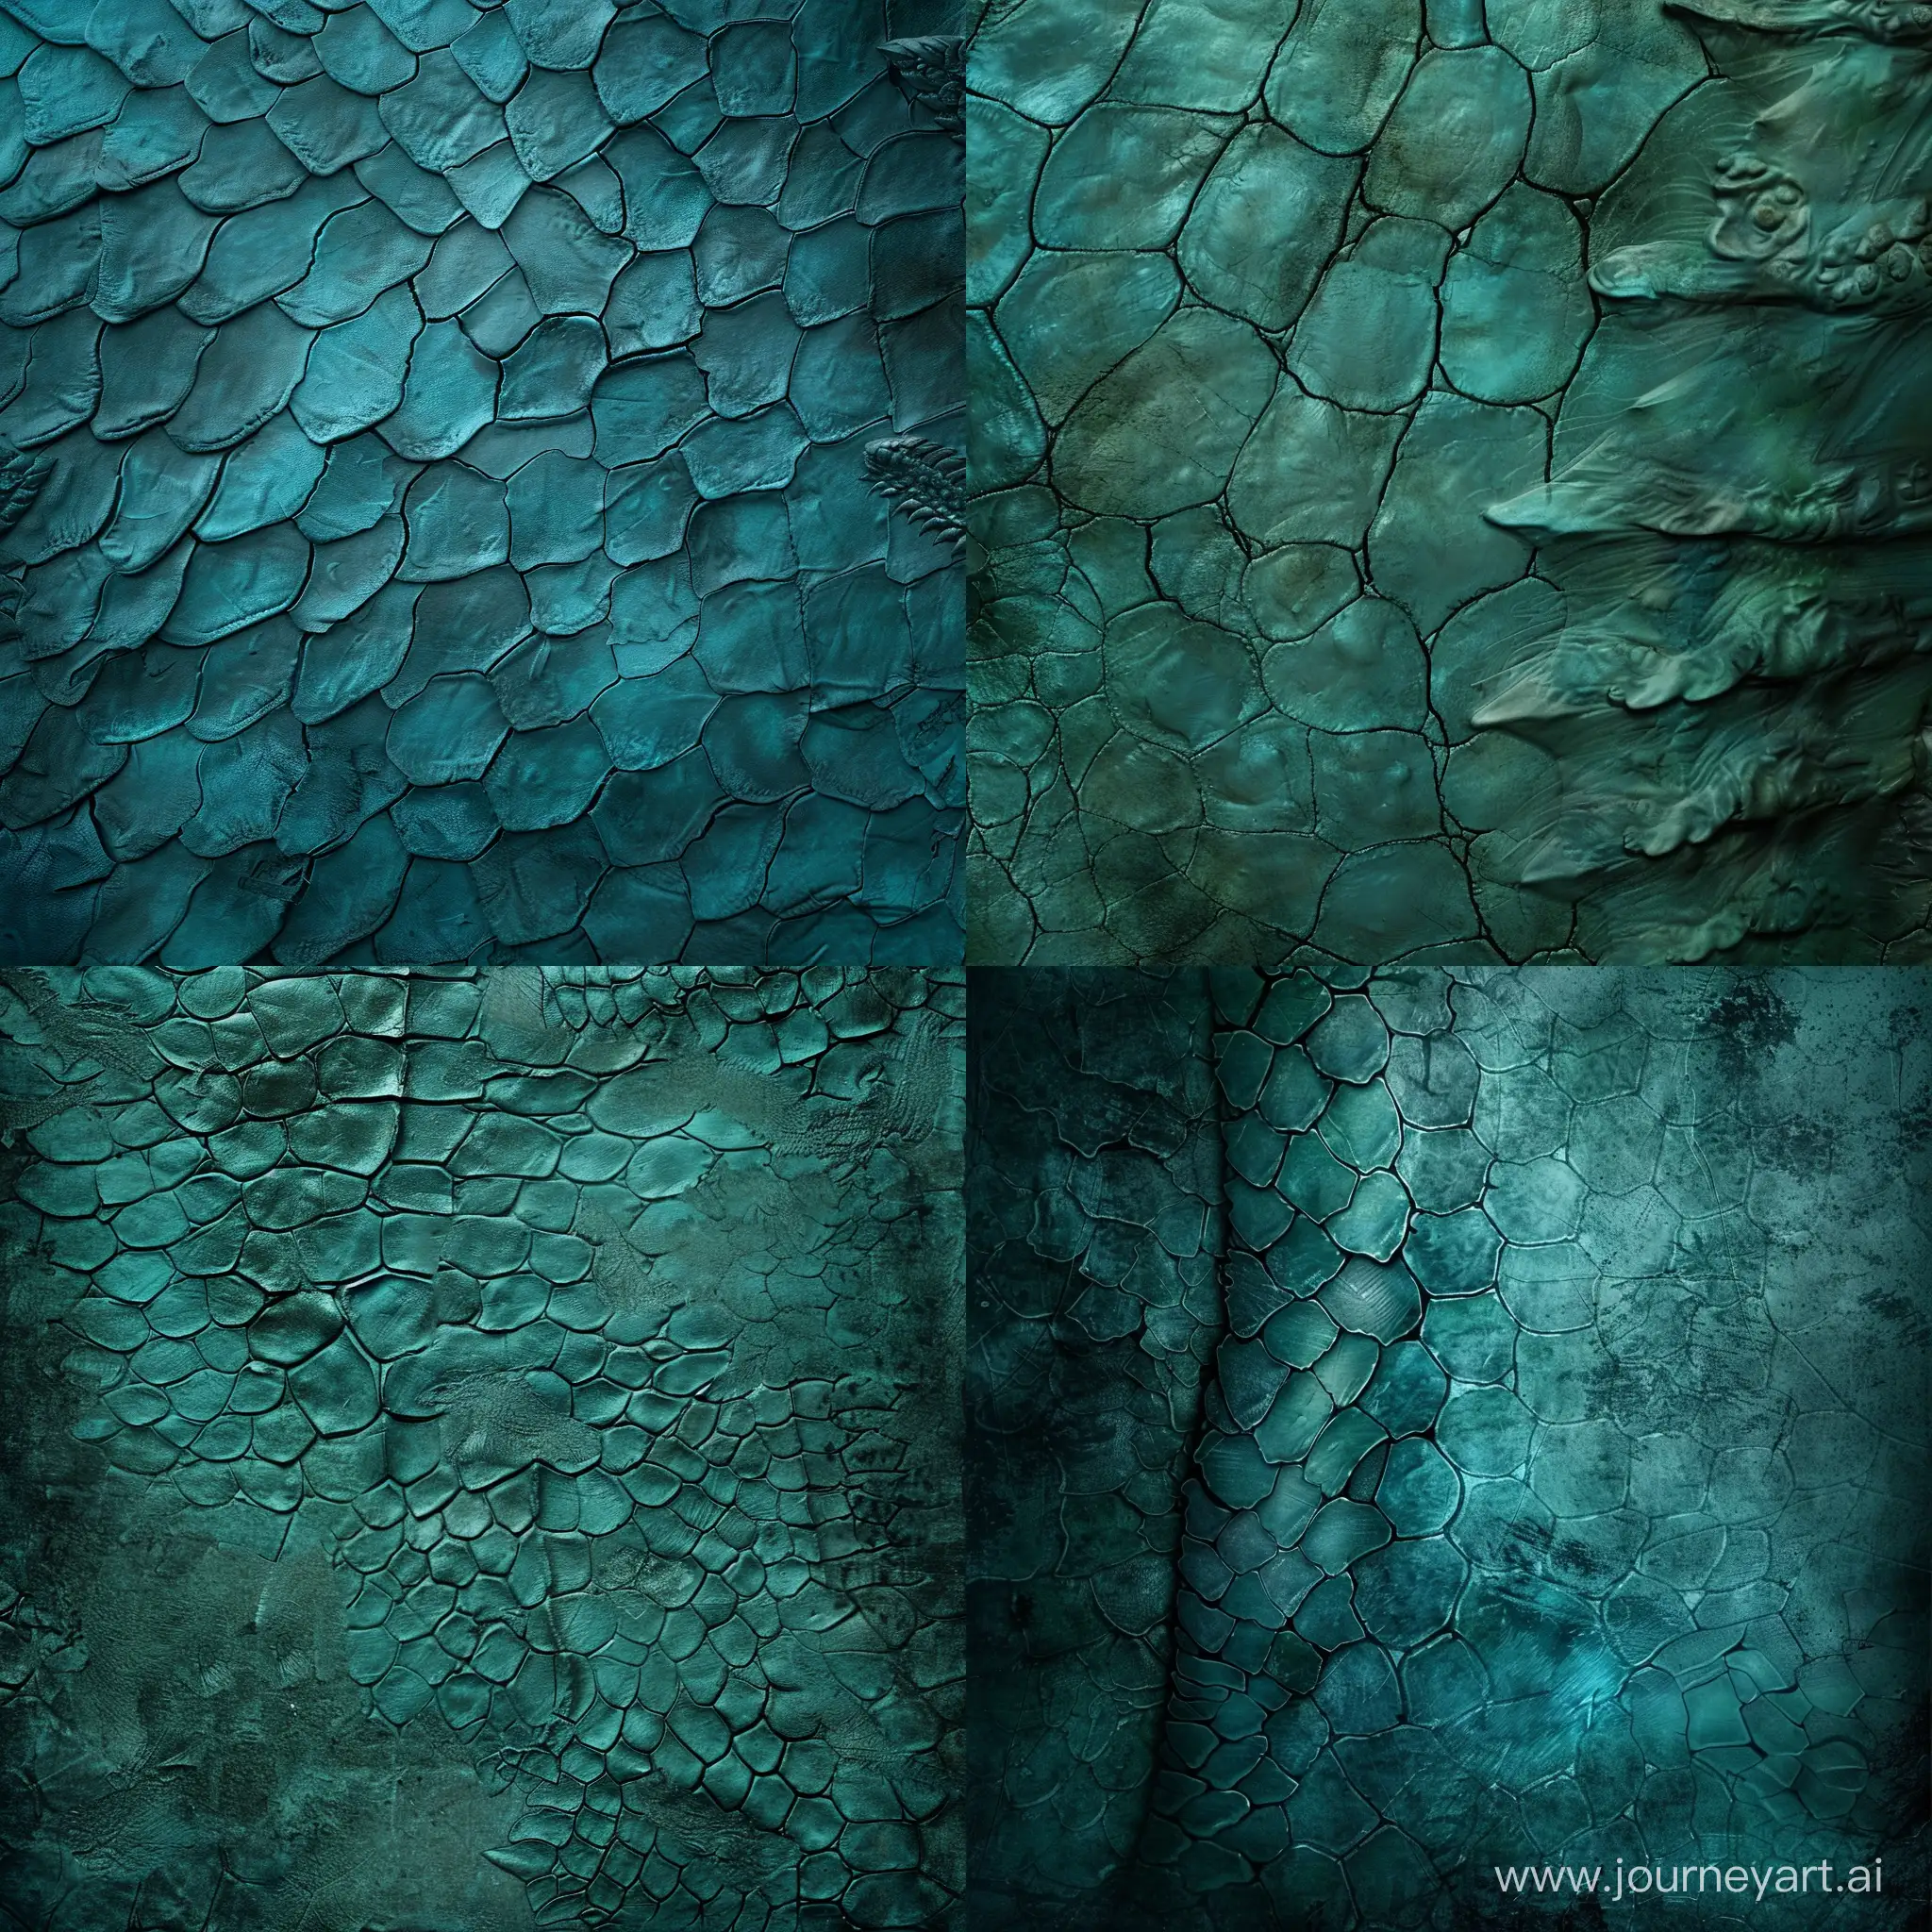 Epic-Dragon-Skin-Texture-Ancient-Banner-in-Teal-Color